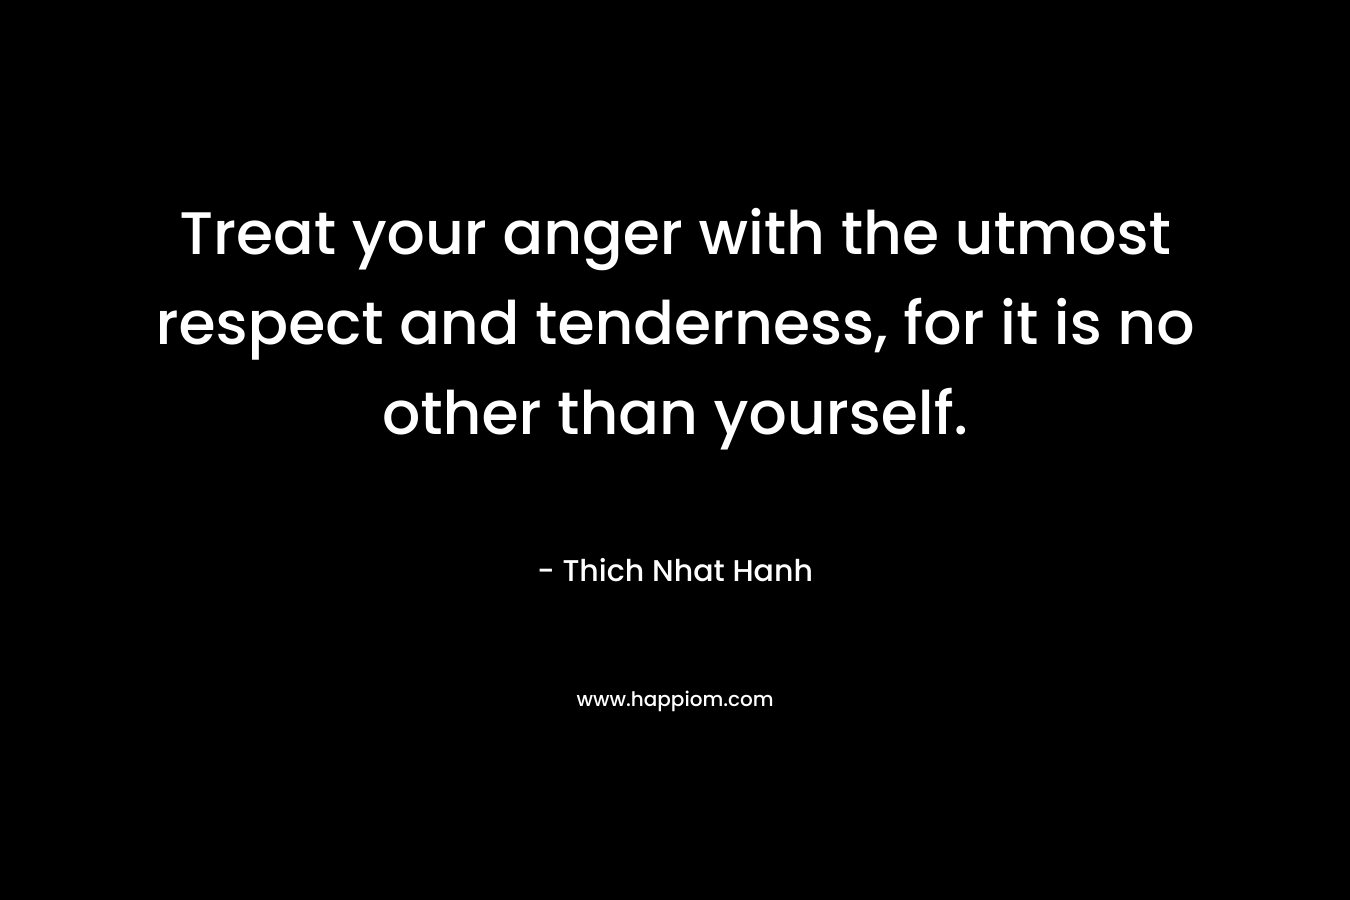 Treat your anger with the utmost respect and tenderness, for it is no other than yourself.